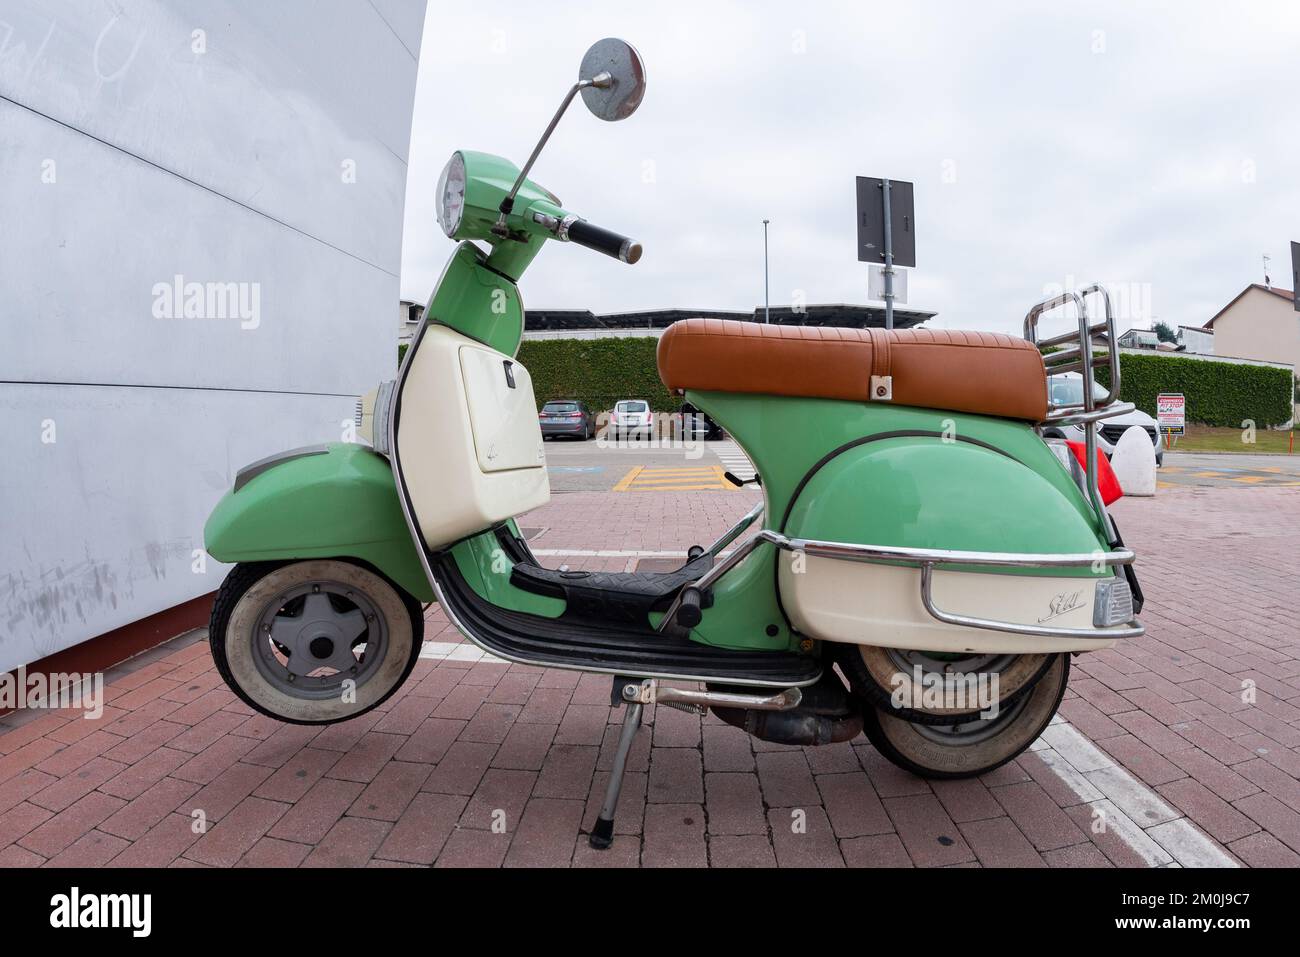 Bra, Cuneo, Italy - November 30, 2022: LML Star is a scooter model derived from the piaggio vespa produced by the Indian motorcycle manufacturer LML L Stock Photo